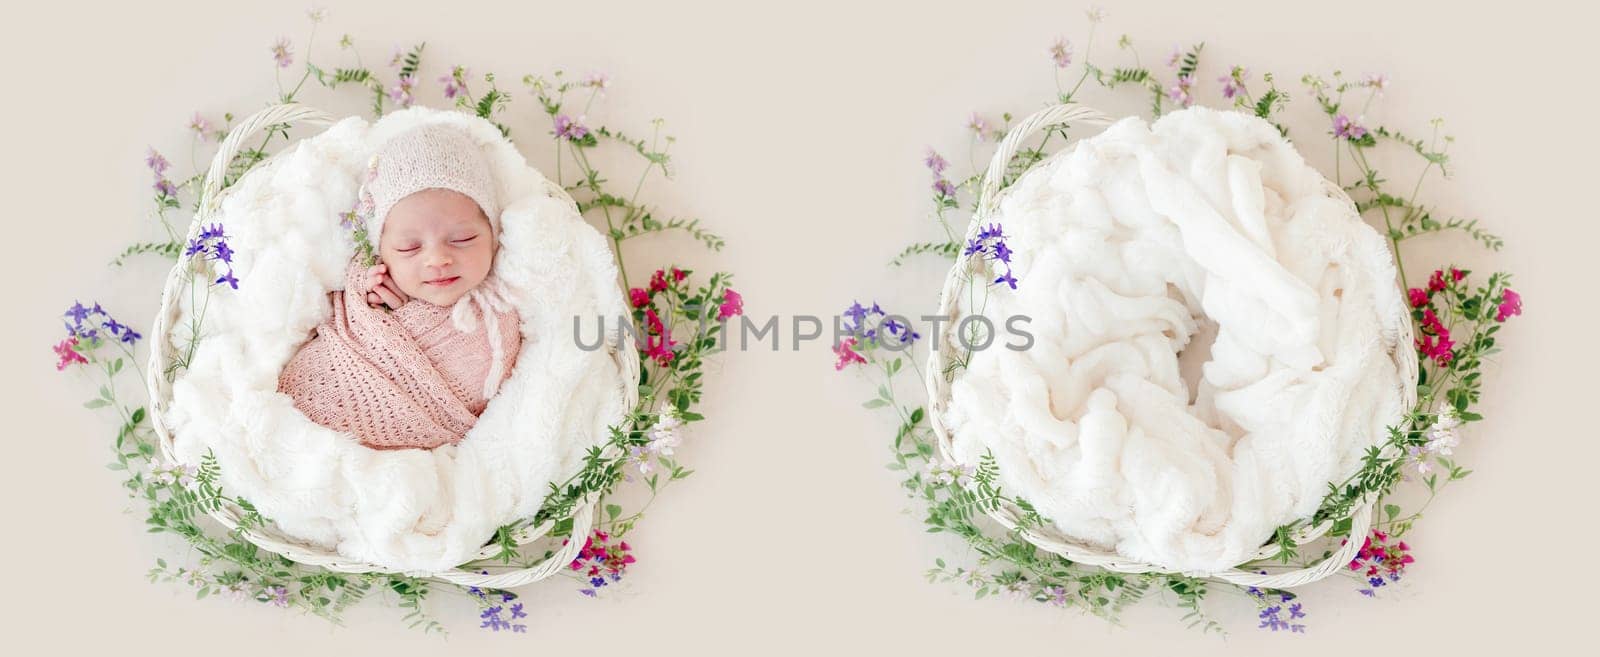 Sleeping newborn baby girl wrapped in a basket with flowers. Collage mix with infant and studio furniture for kid photoshoot